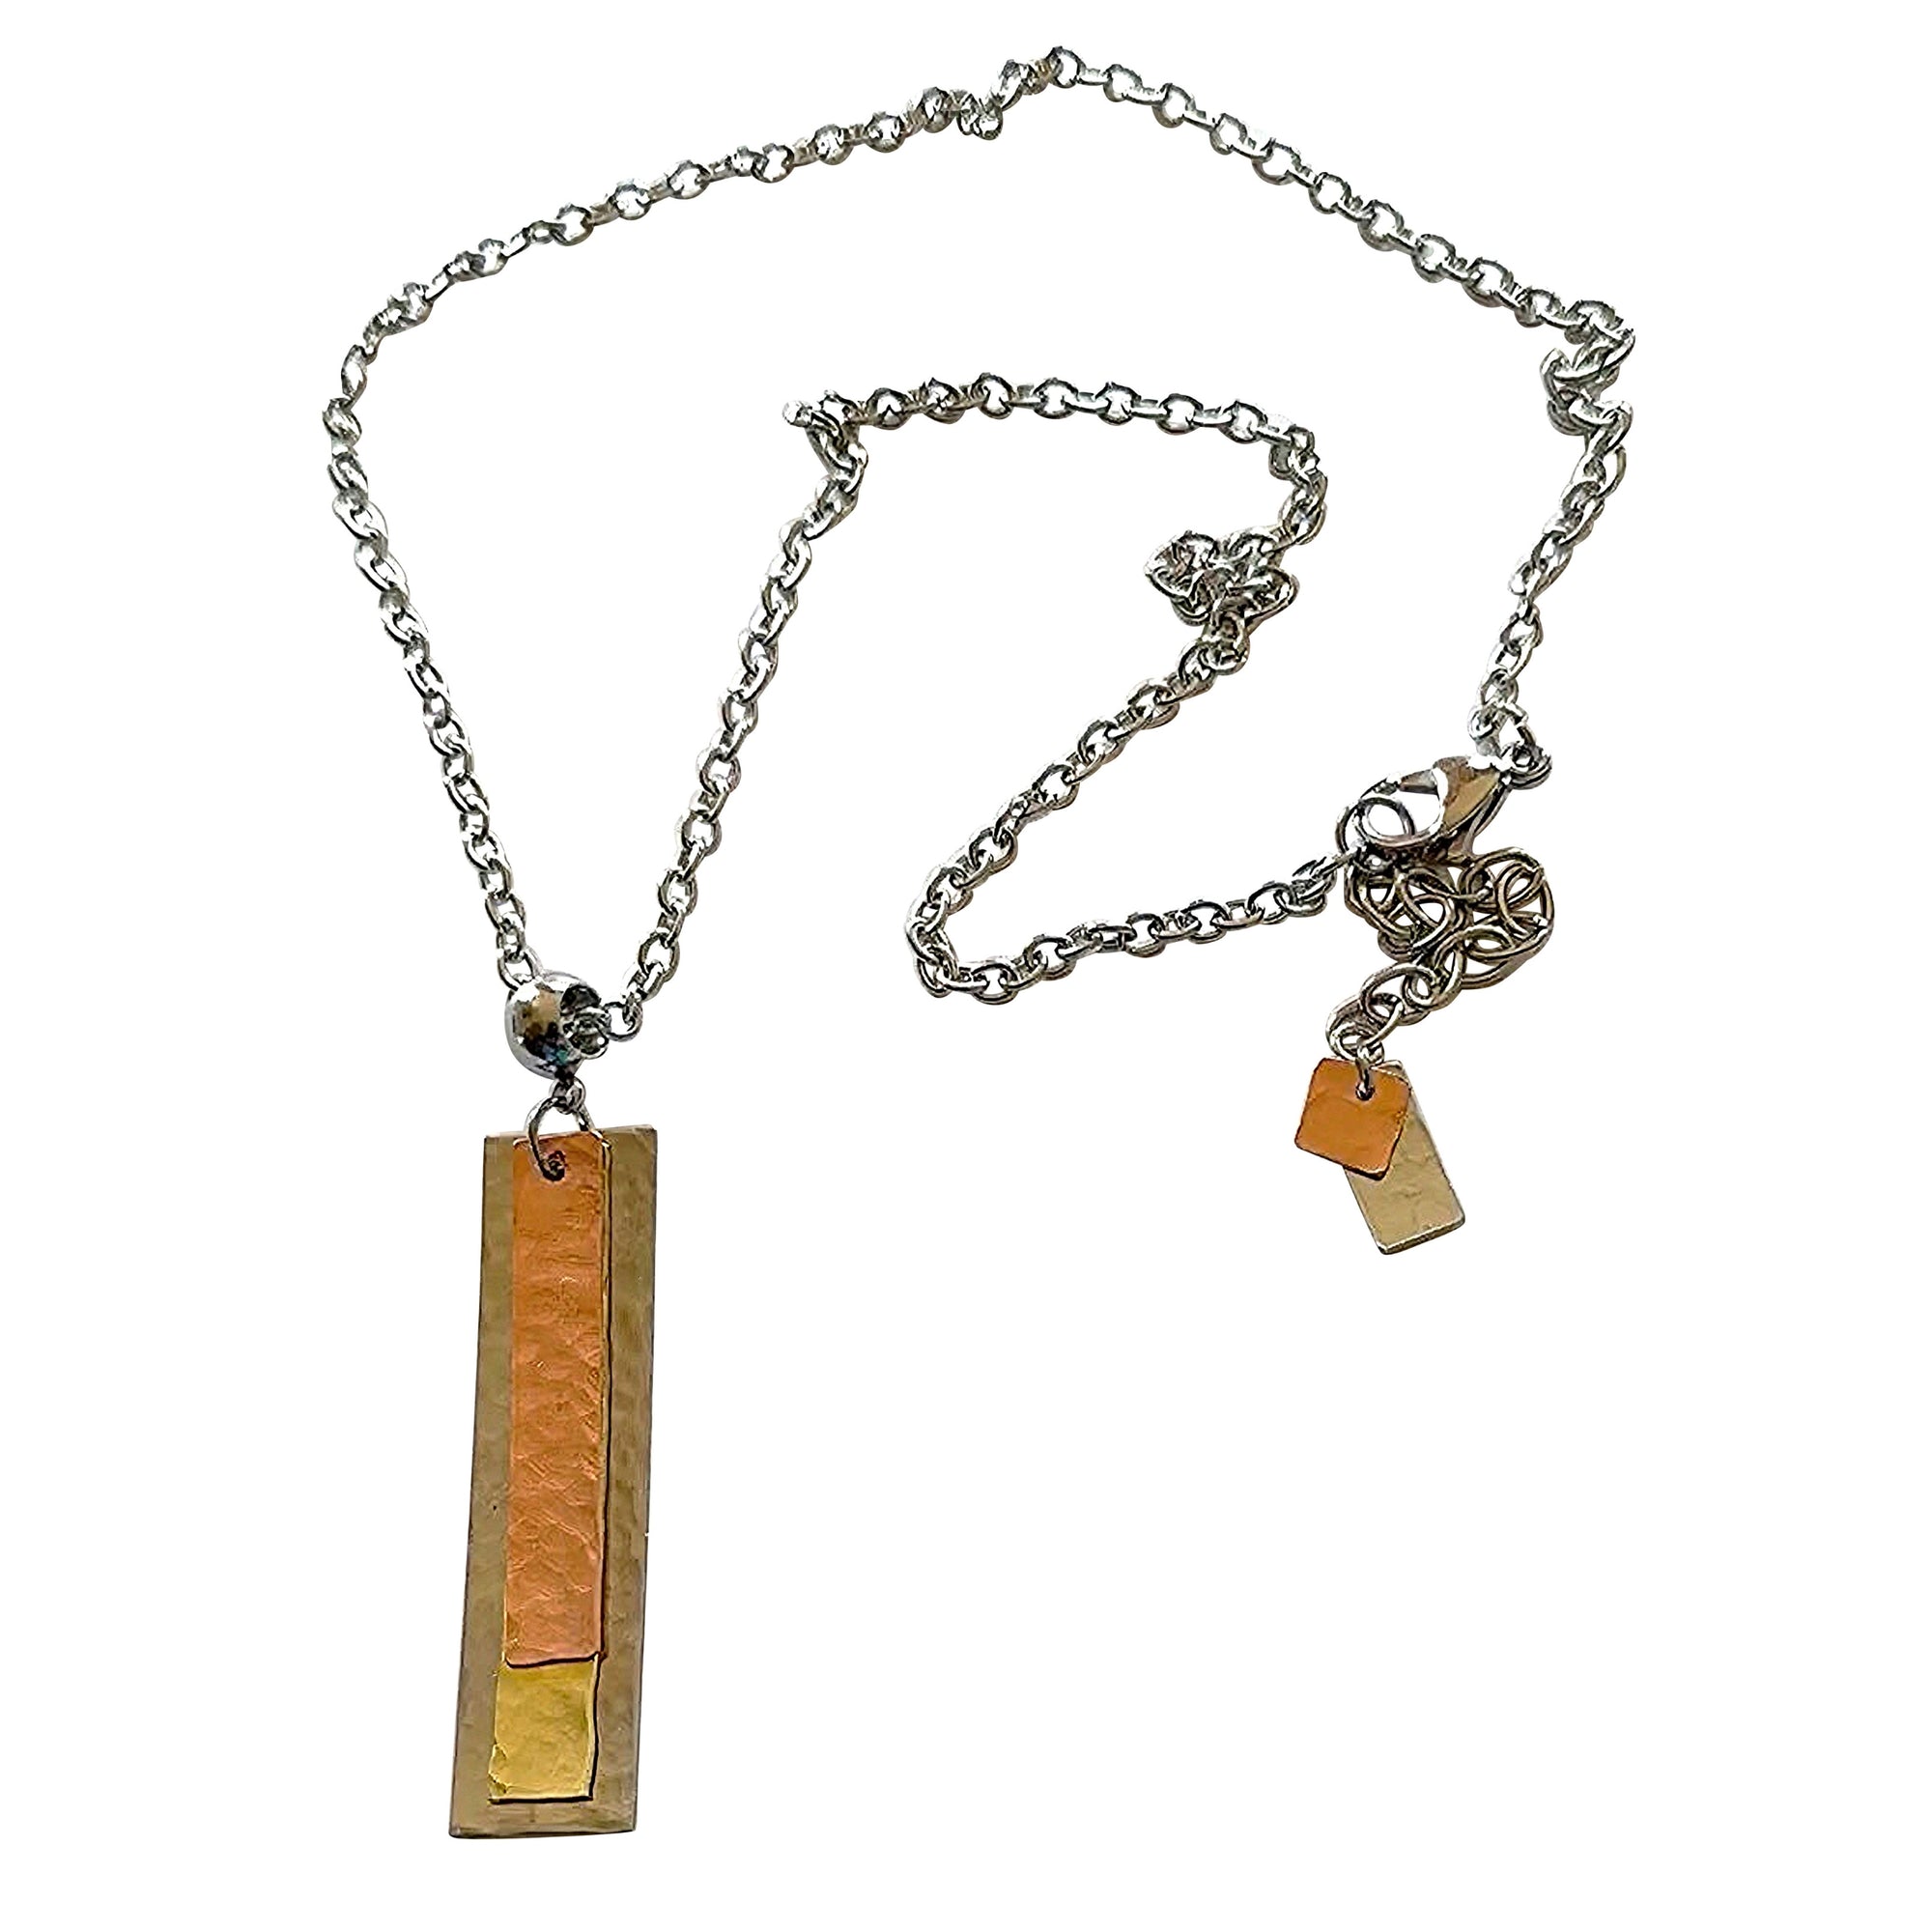 Layered Copper, Brass, Stainless Steel Pendant Necklace